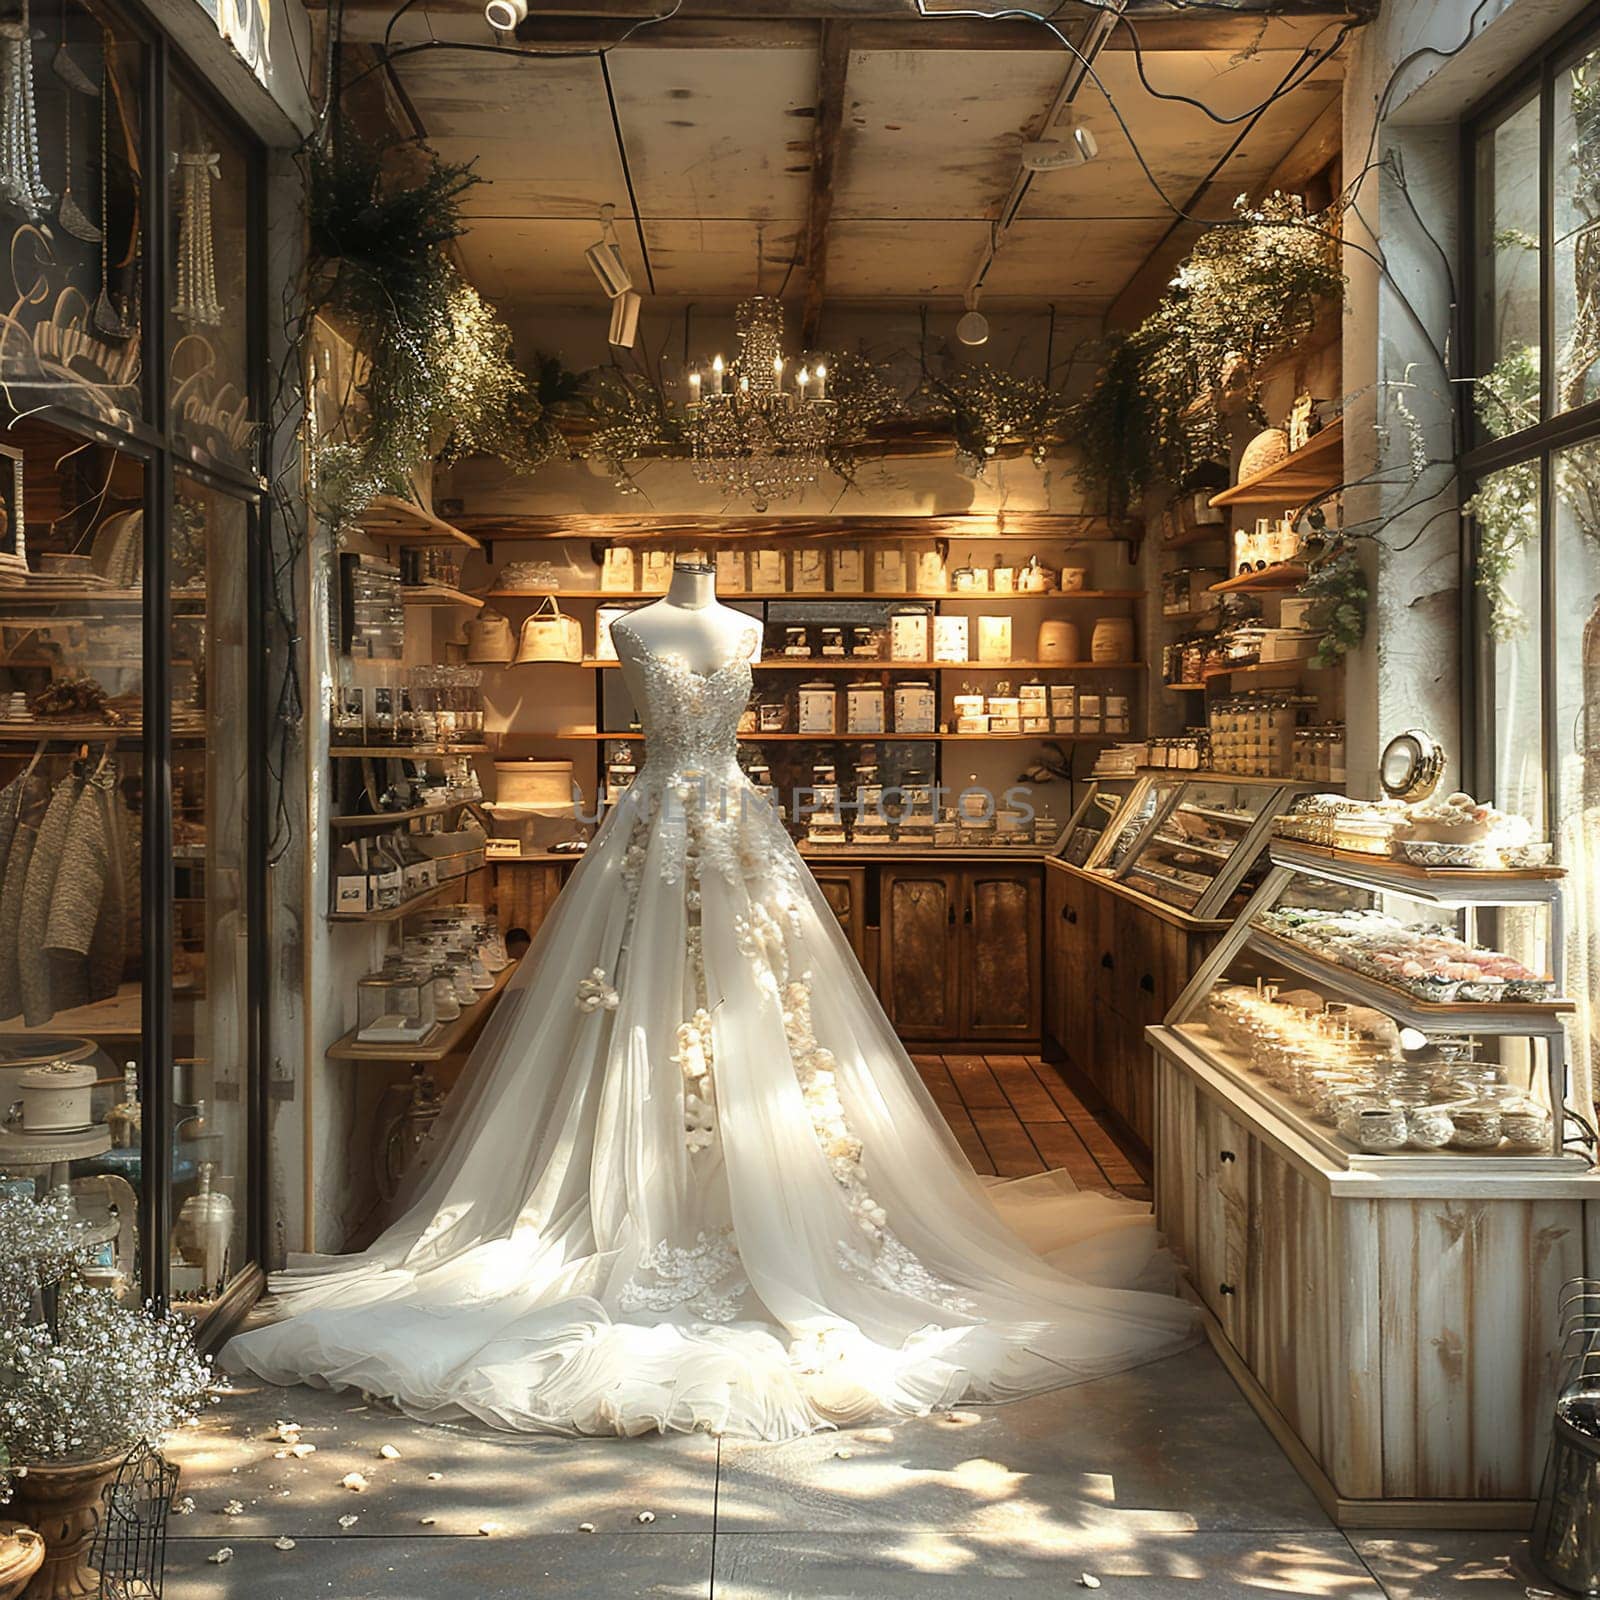 Elegant Bridal Boutique with Soft Focus on Gowns and Accessories by Benzoix